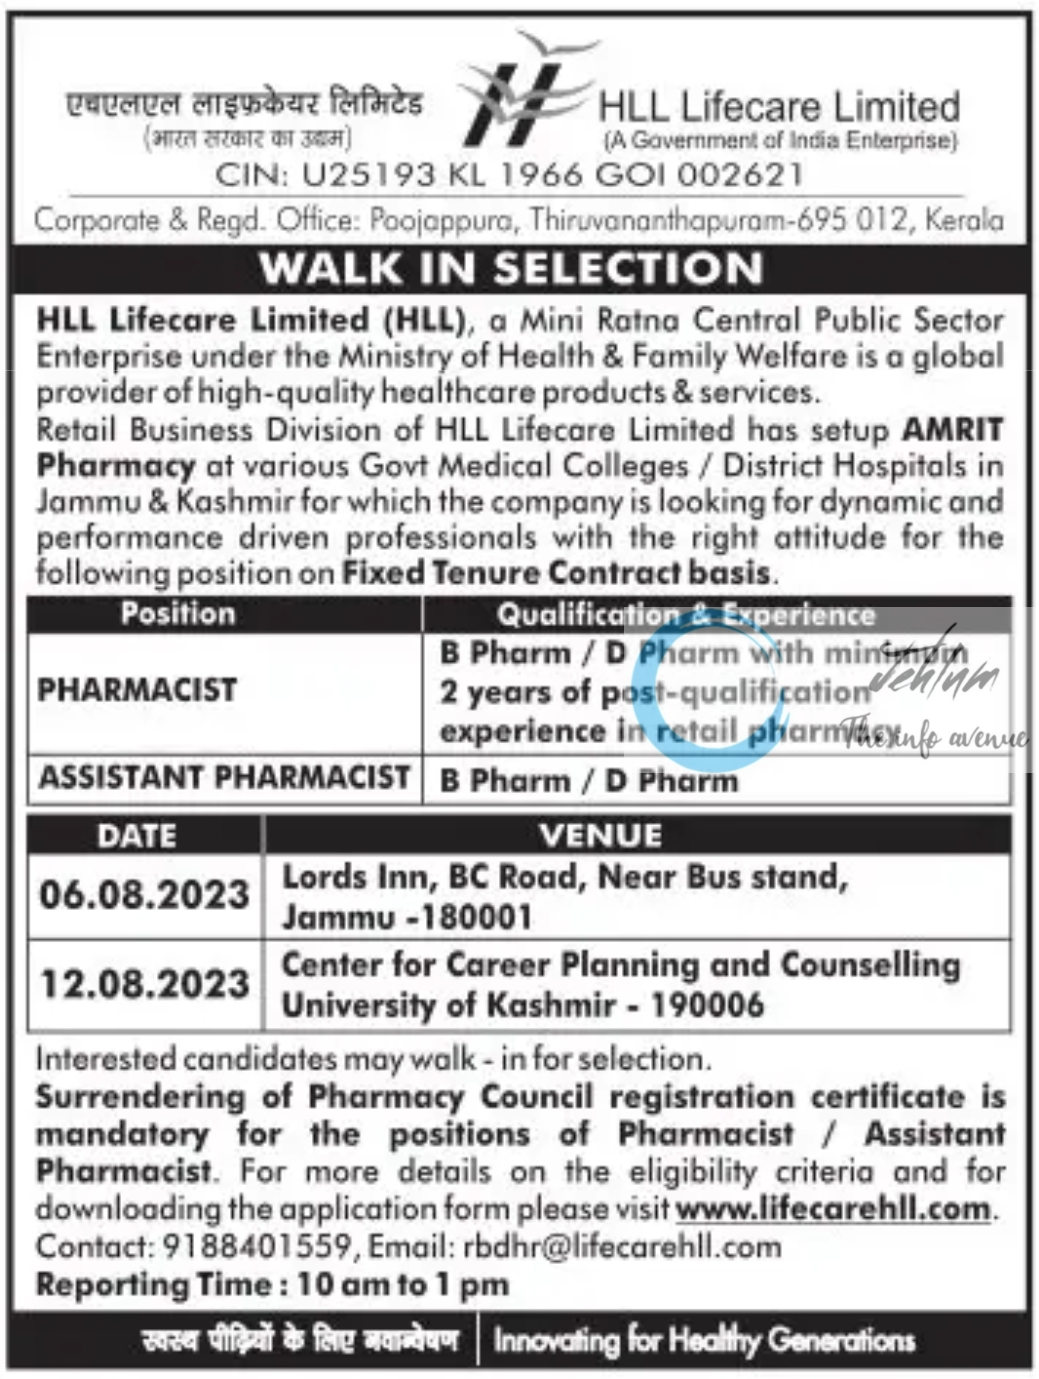 HLL Lifecare Limited Pharmacy Walk In Selection 2023